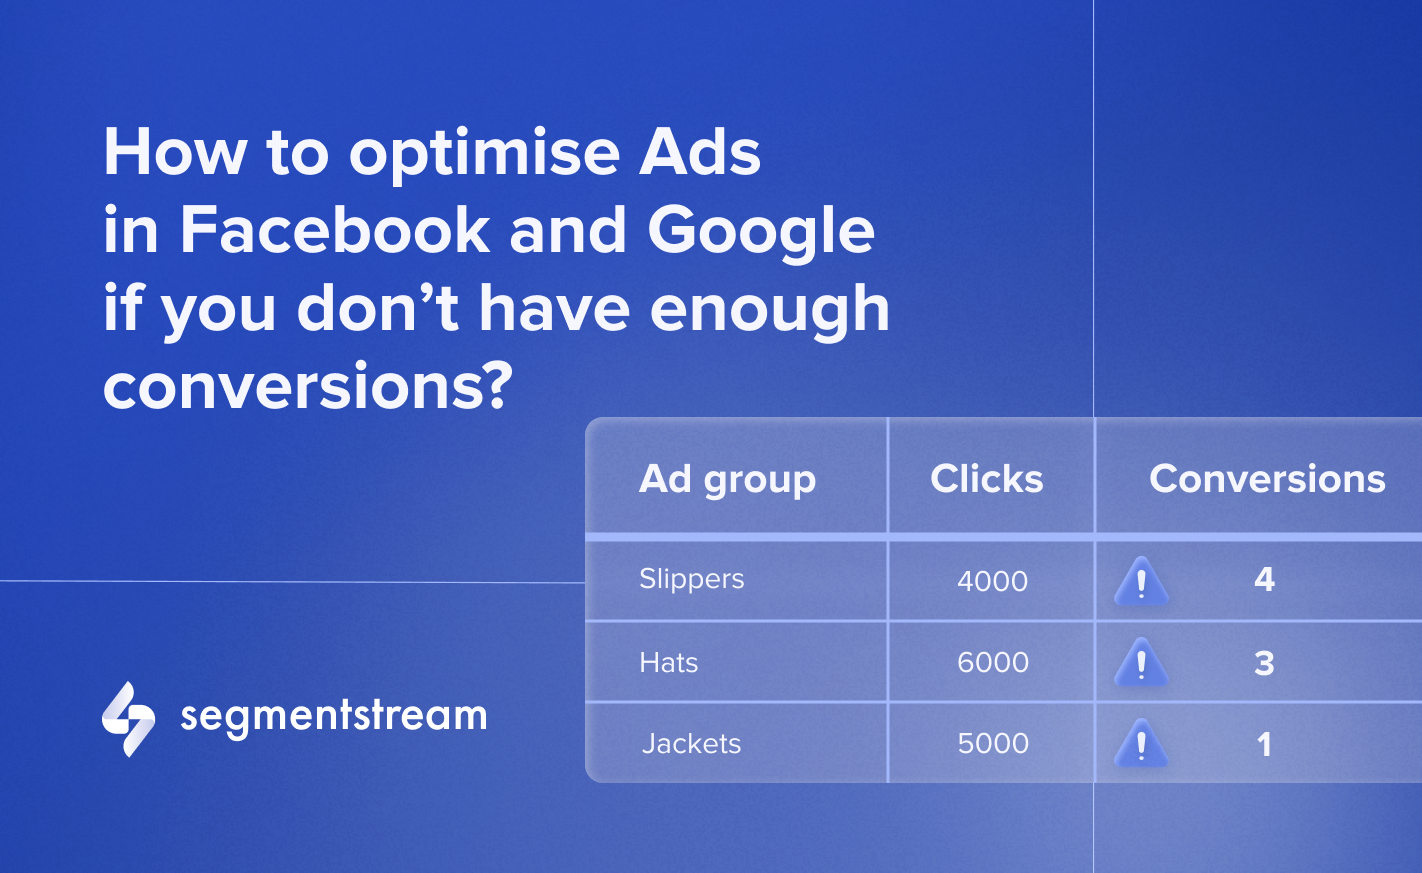 How to optimise Facebook Ads and Google Ads if you don’t have enough conversions?